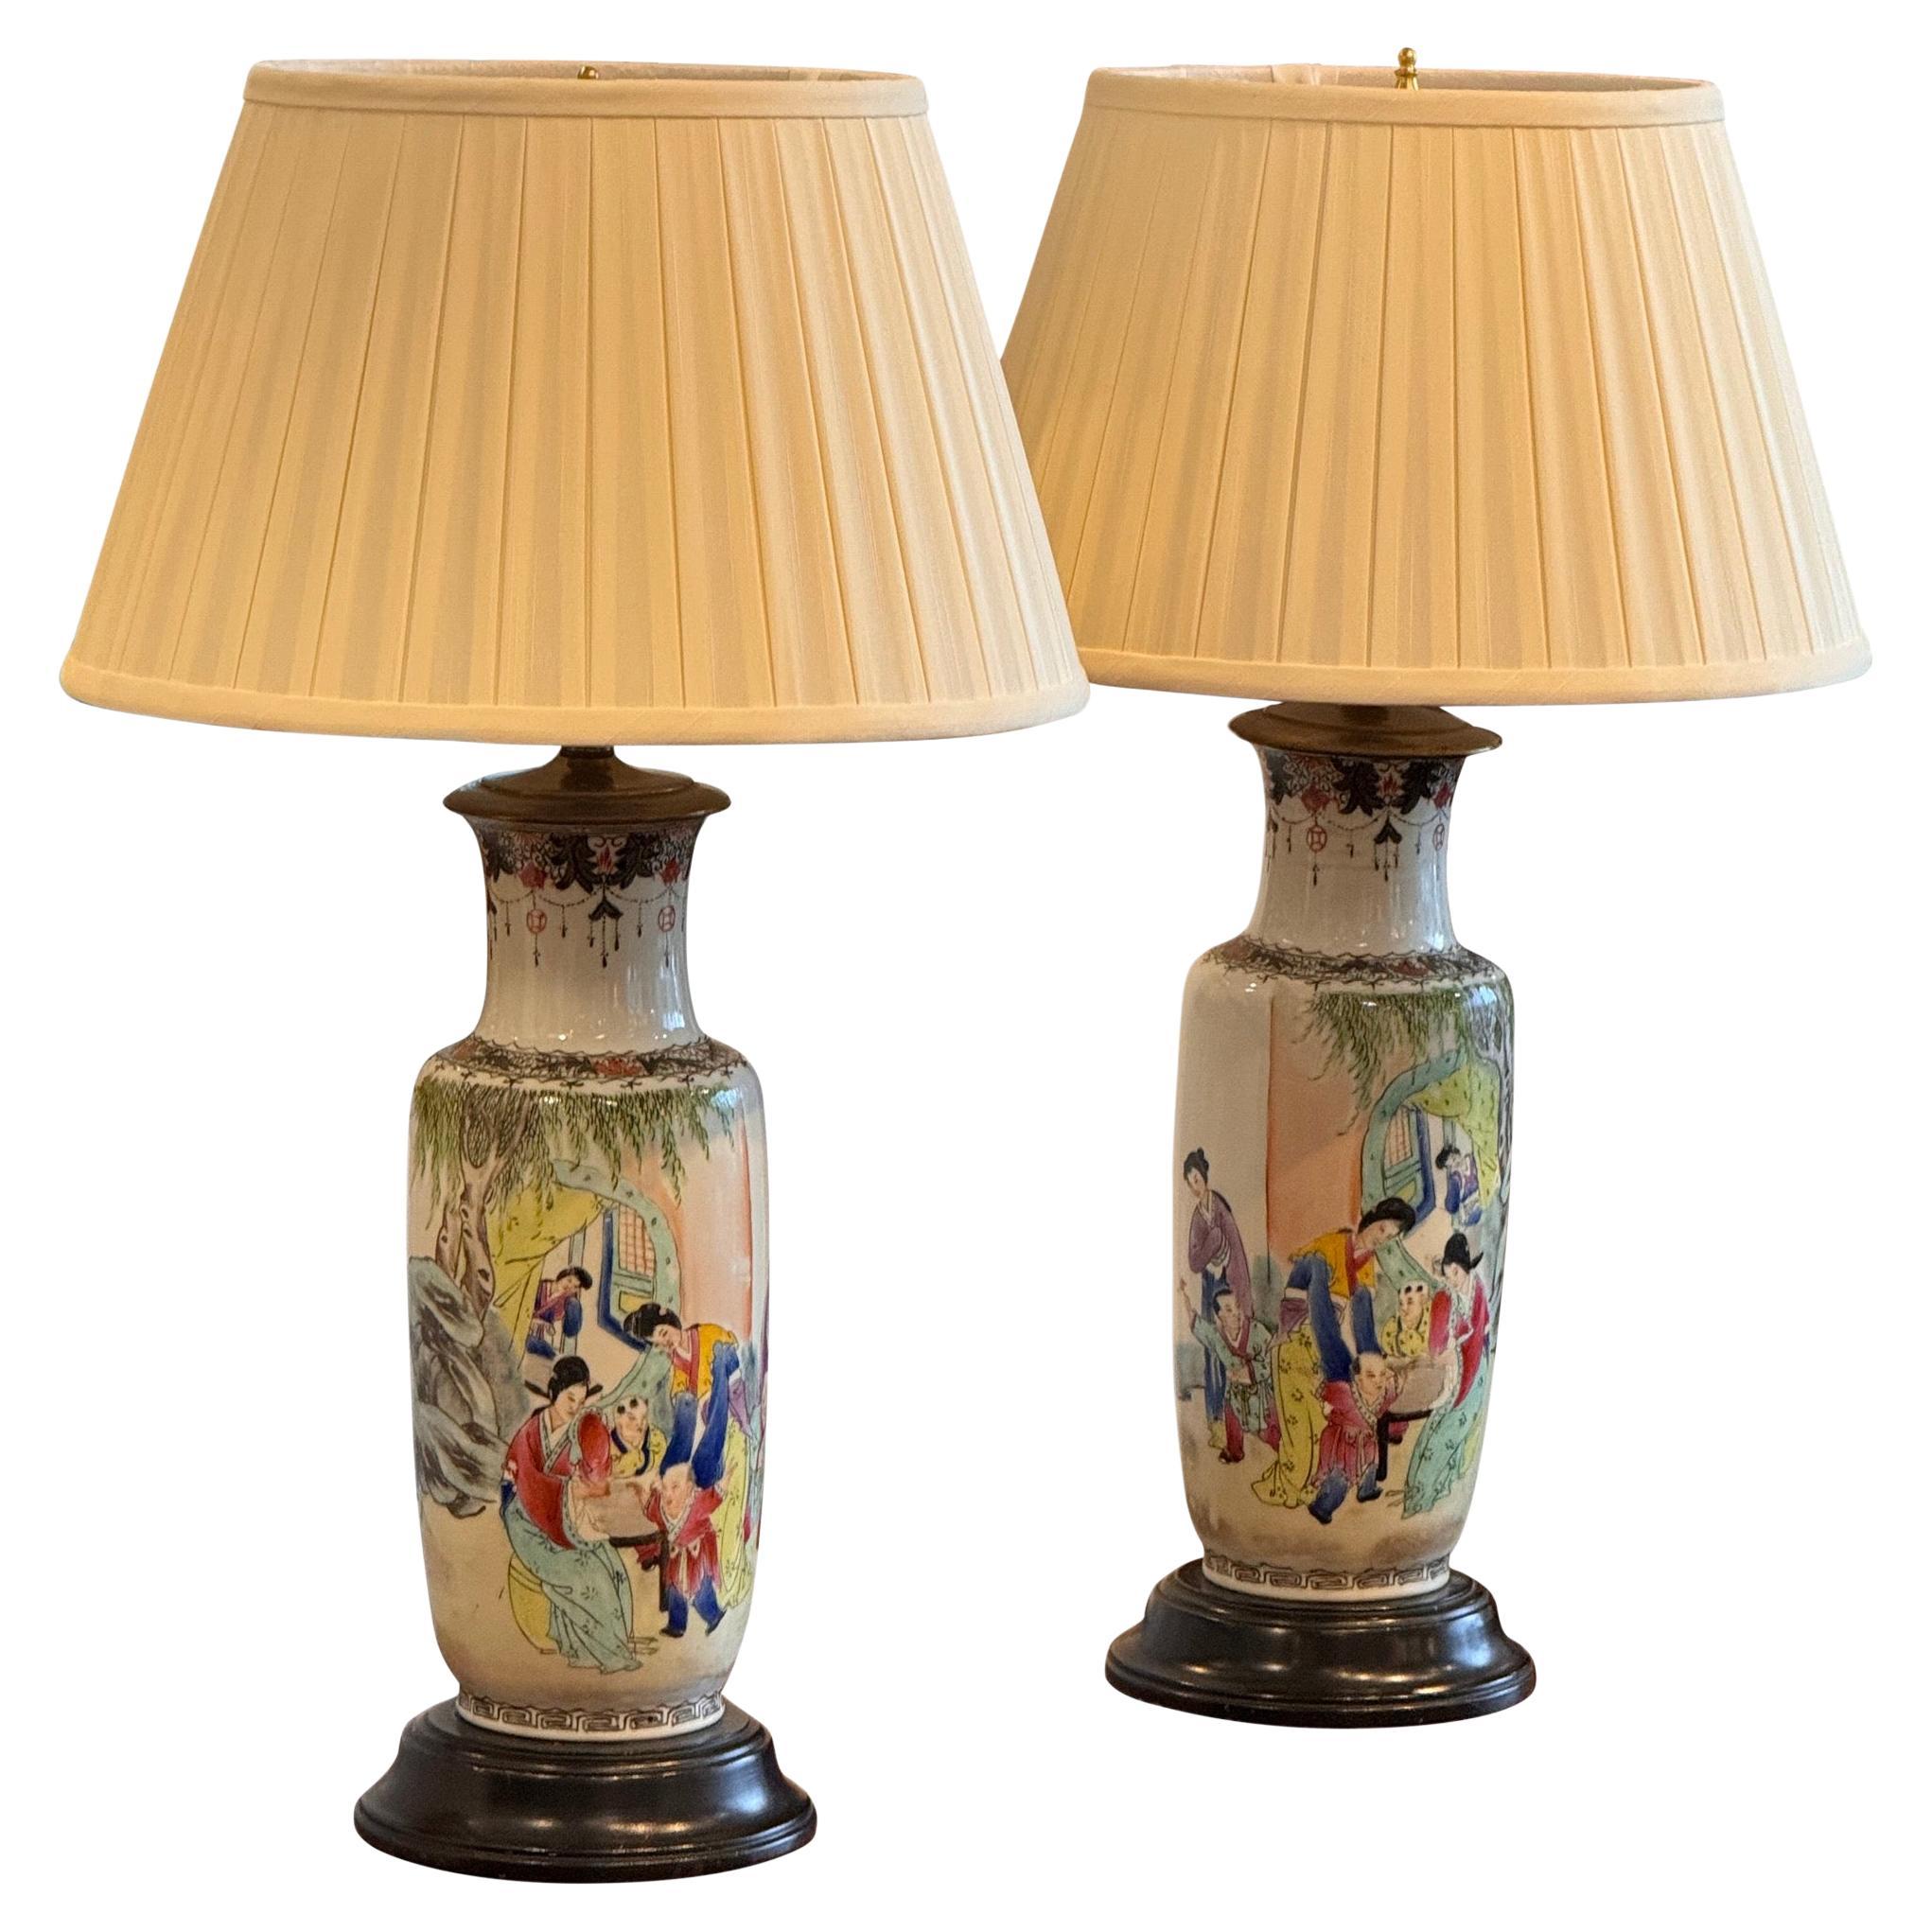 1920s Chinese Urn Lamp - Set of 2